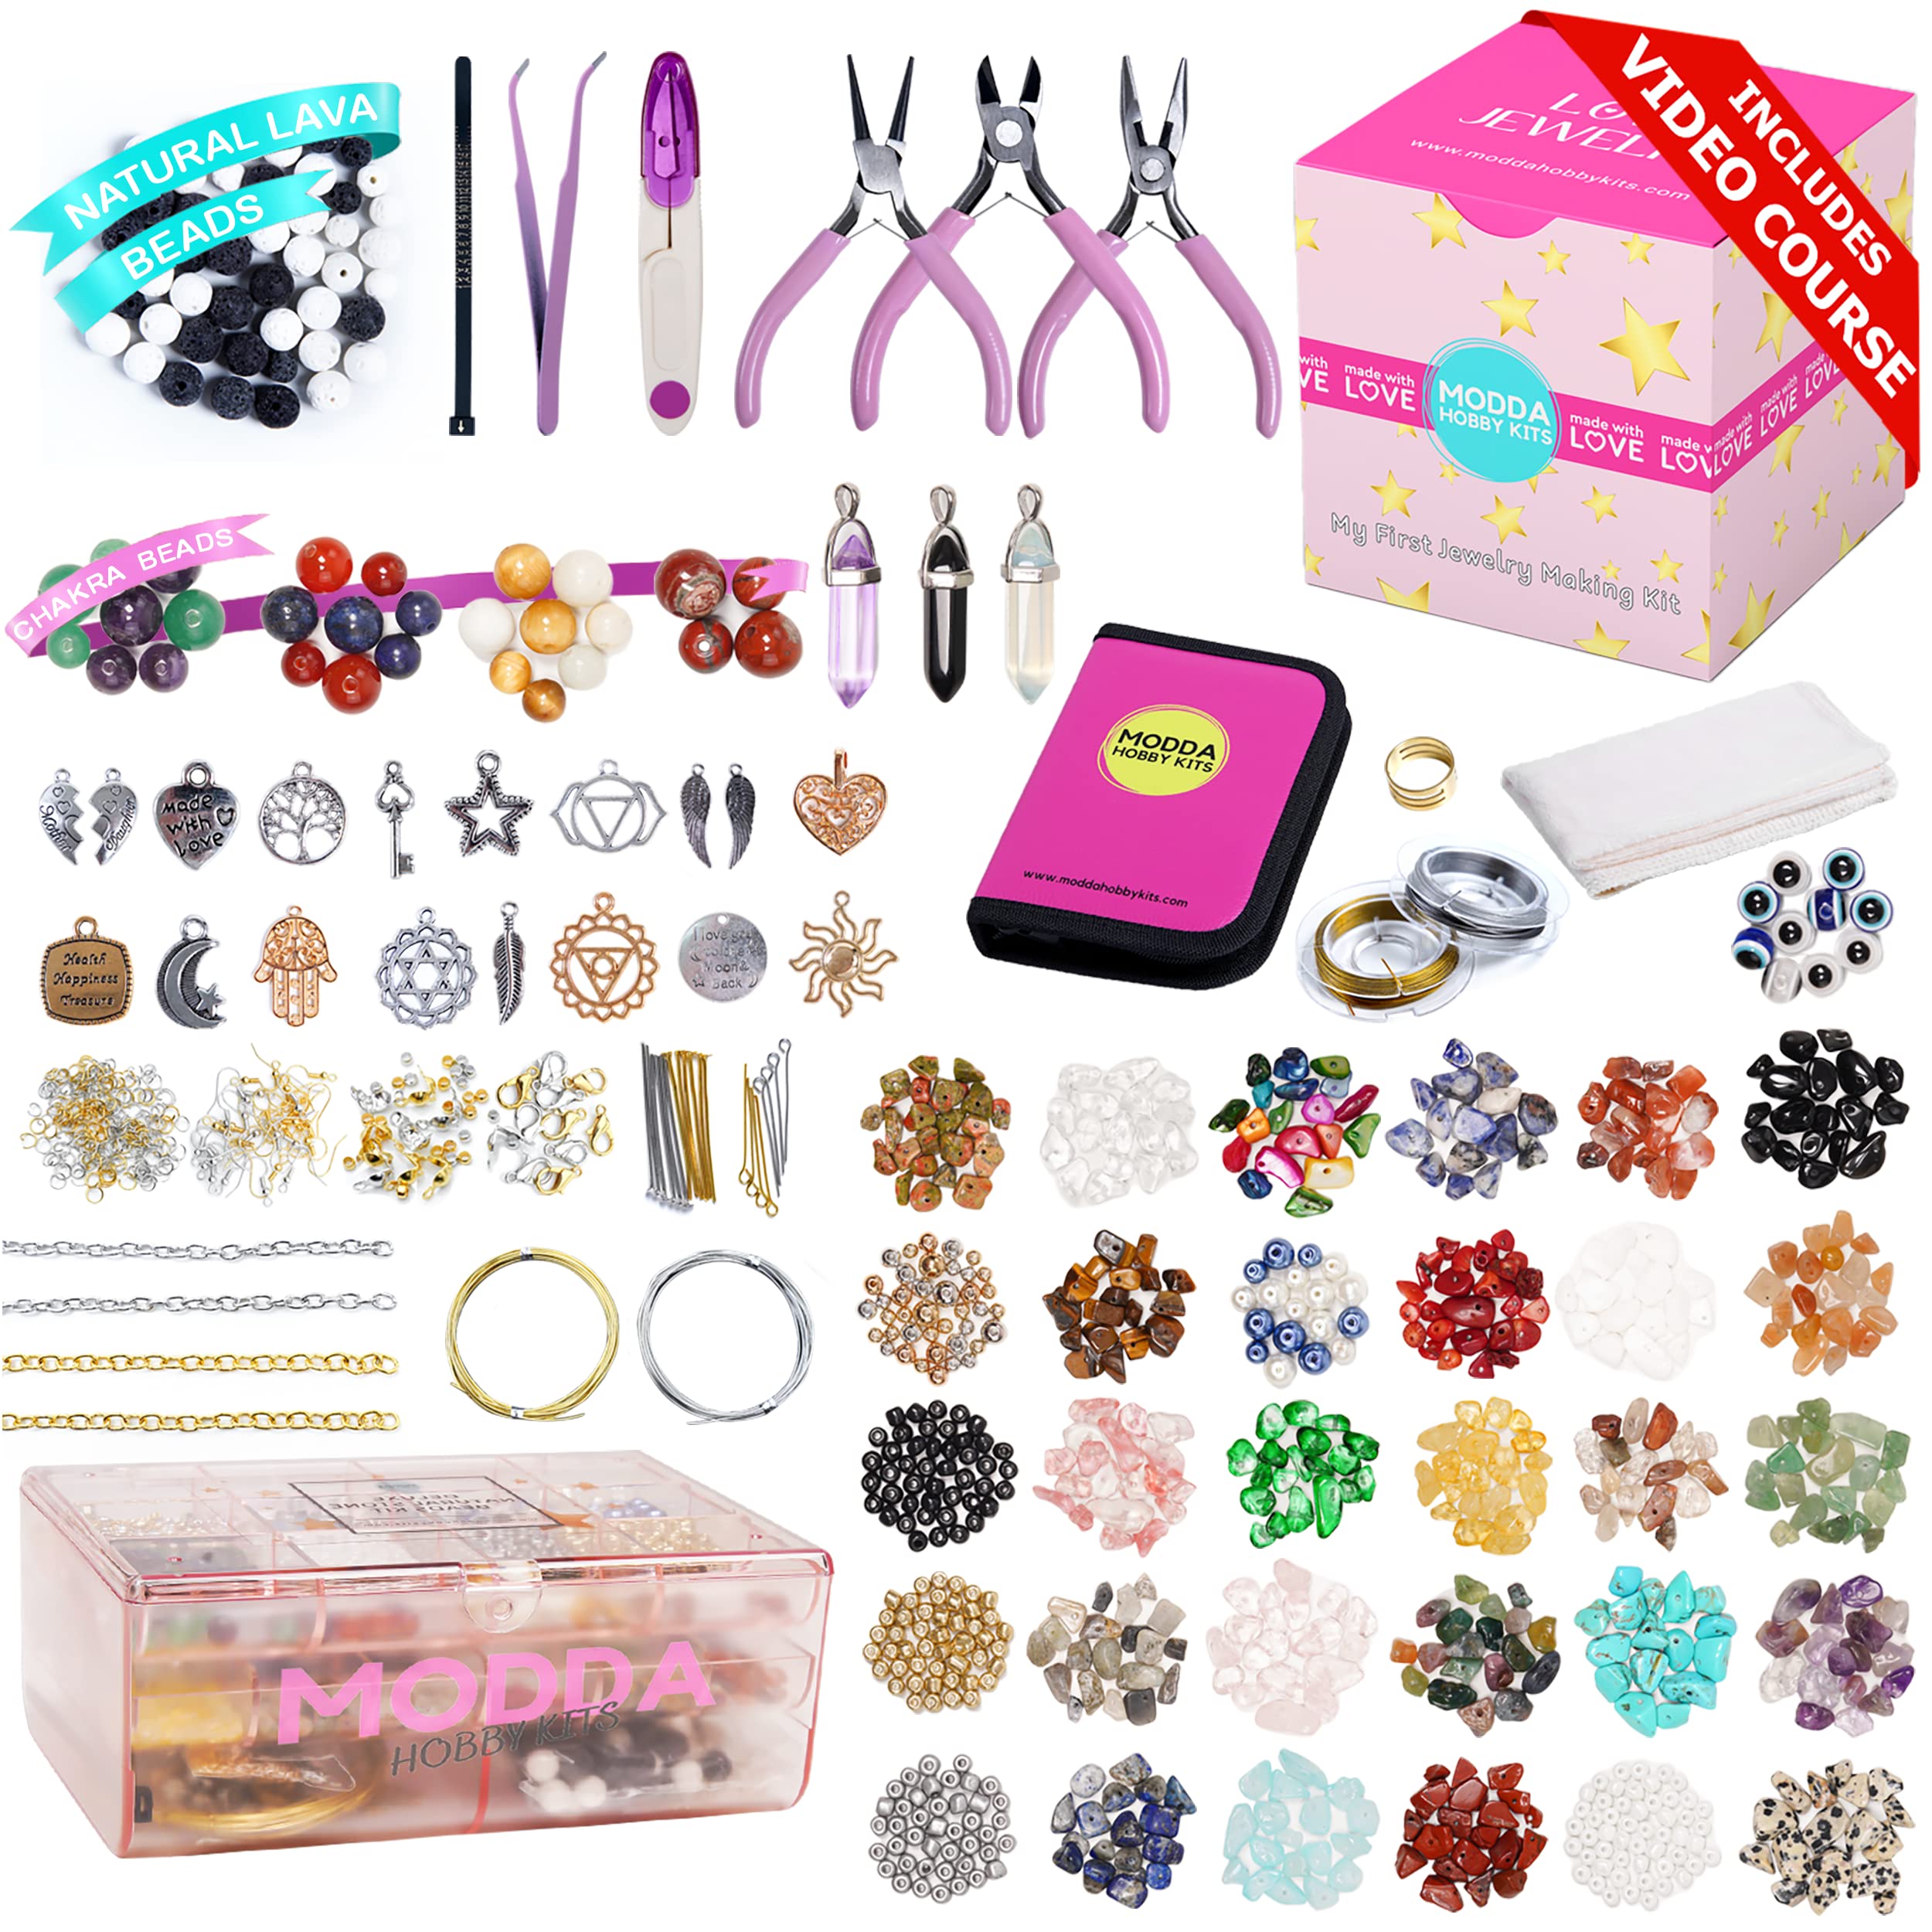 MODDA Natural Stone Jewelry Making Kit with Video Course Includes